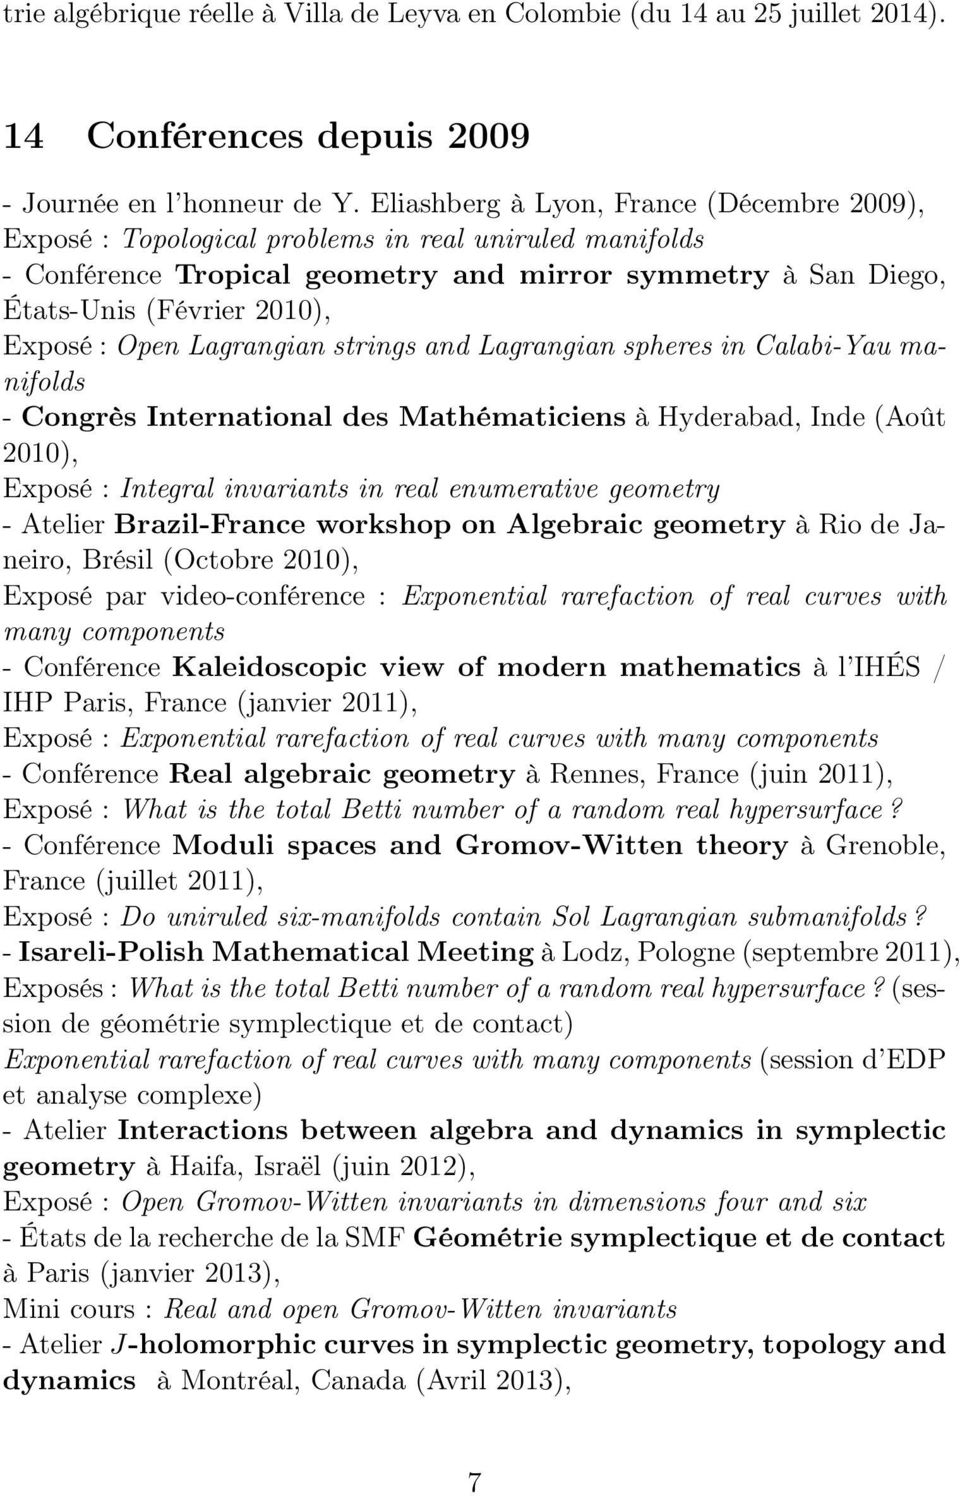 Open Lagrangian strings and Lagrangian spheres in Calabi-Yau manifolds - Congrès International des Mathématiciens à Hyderabad, Inde (Août 2010), Exposé : Integral invariants in real enumerative